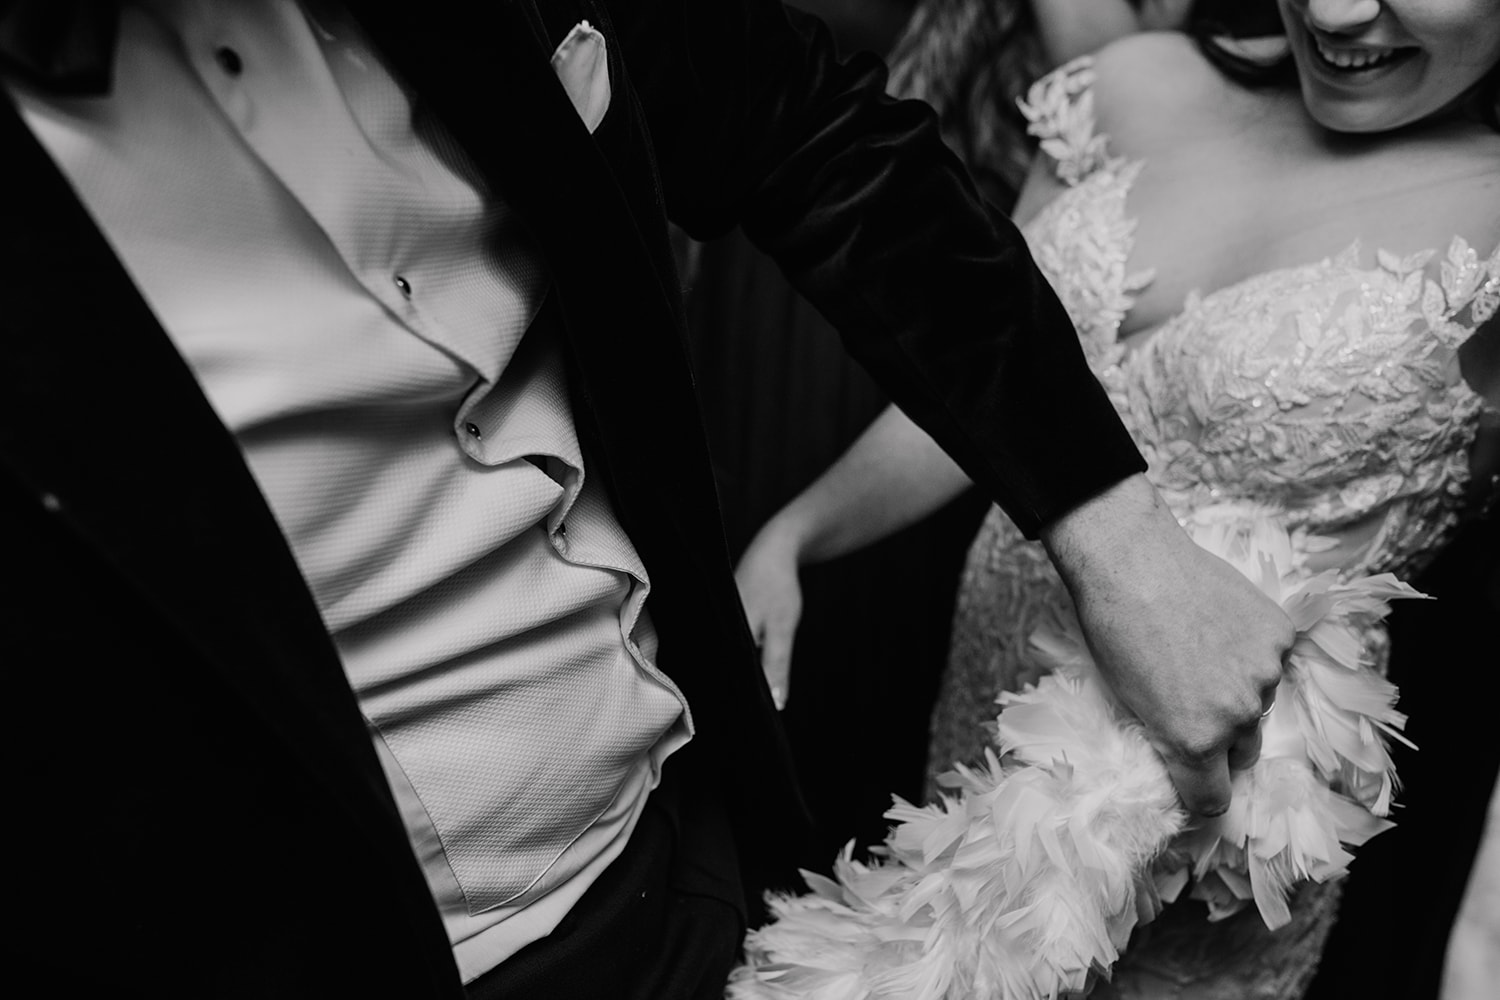 Black and white, close up image of the bride and groom dancing wildly with a feather boa